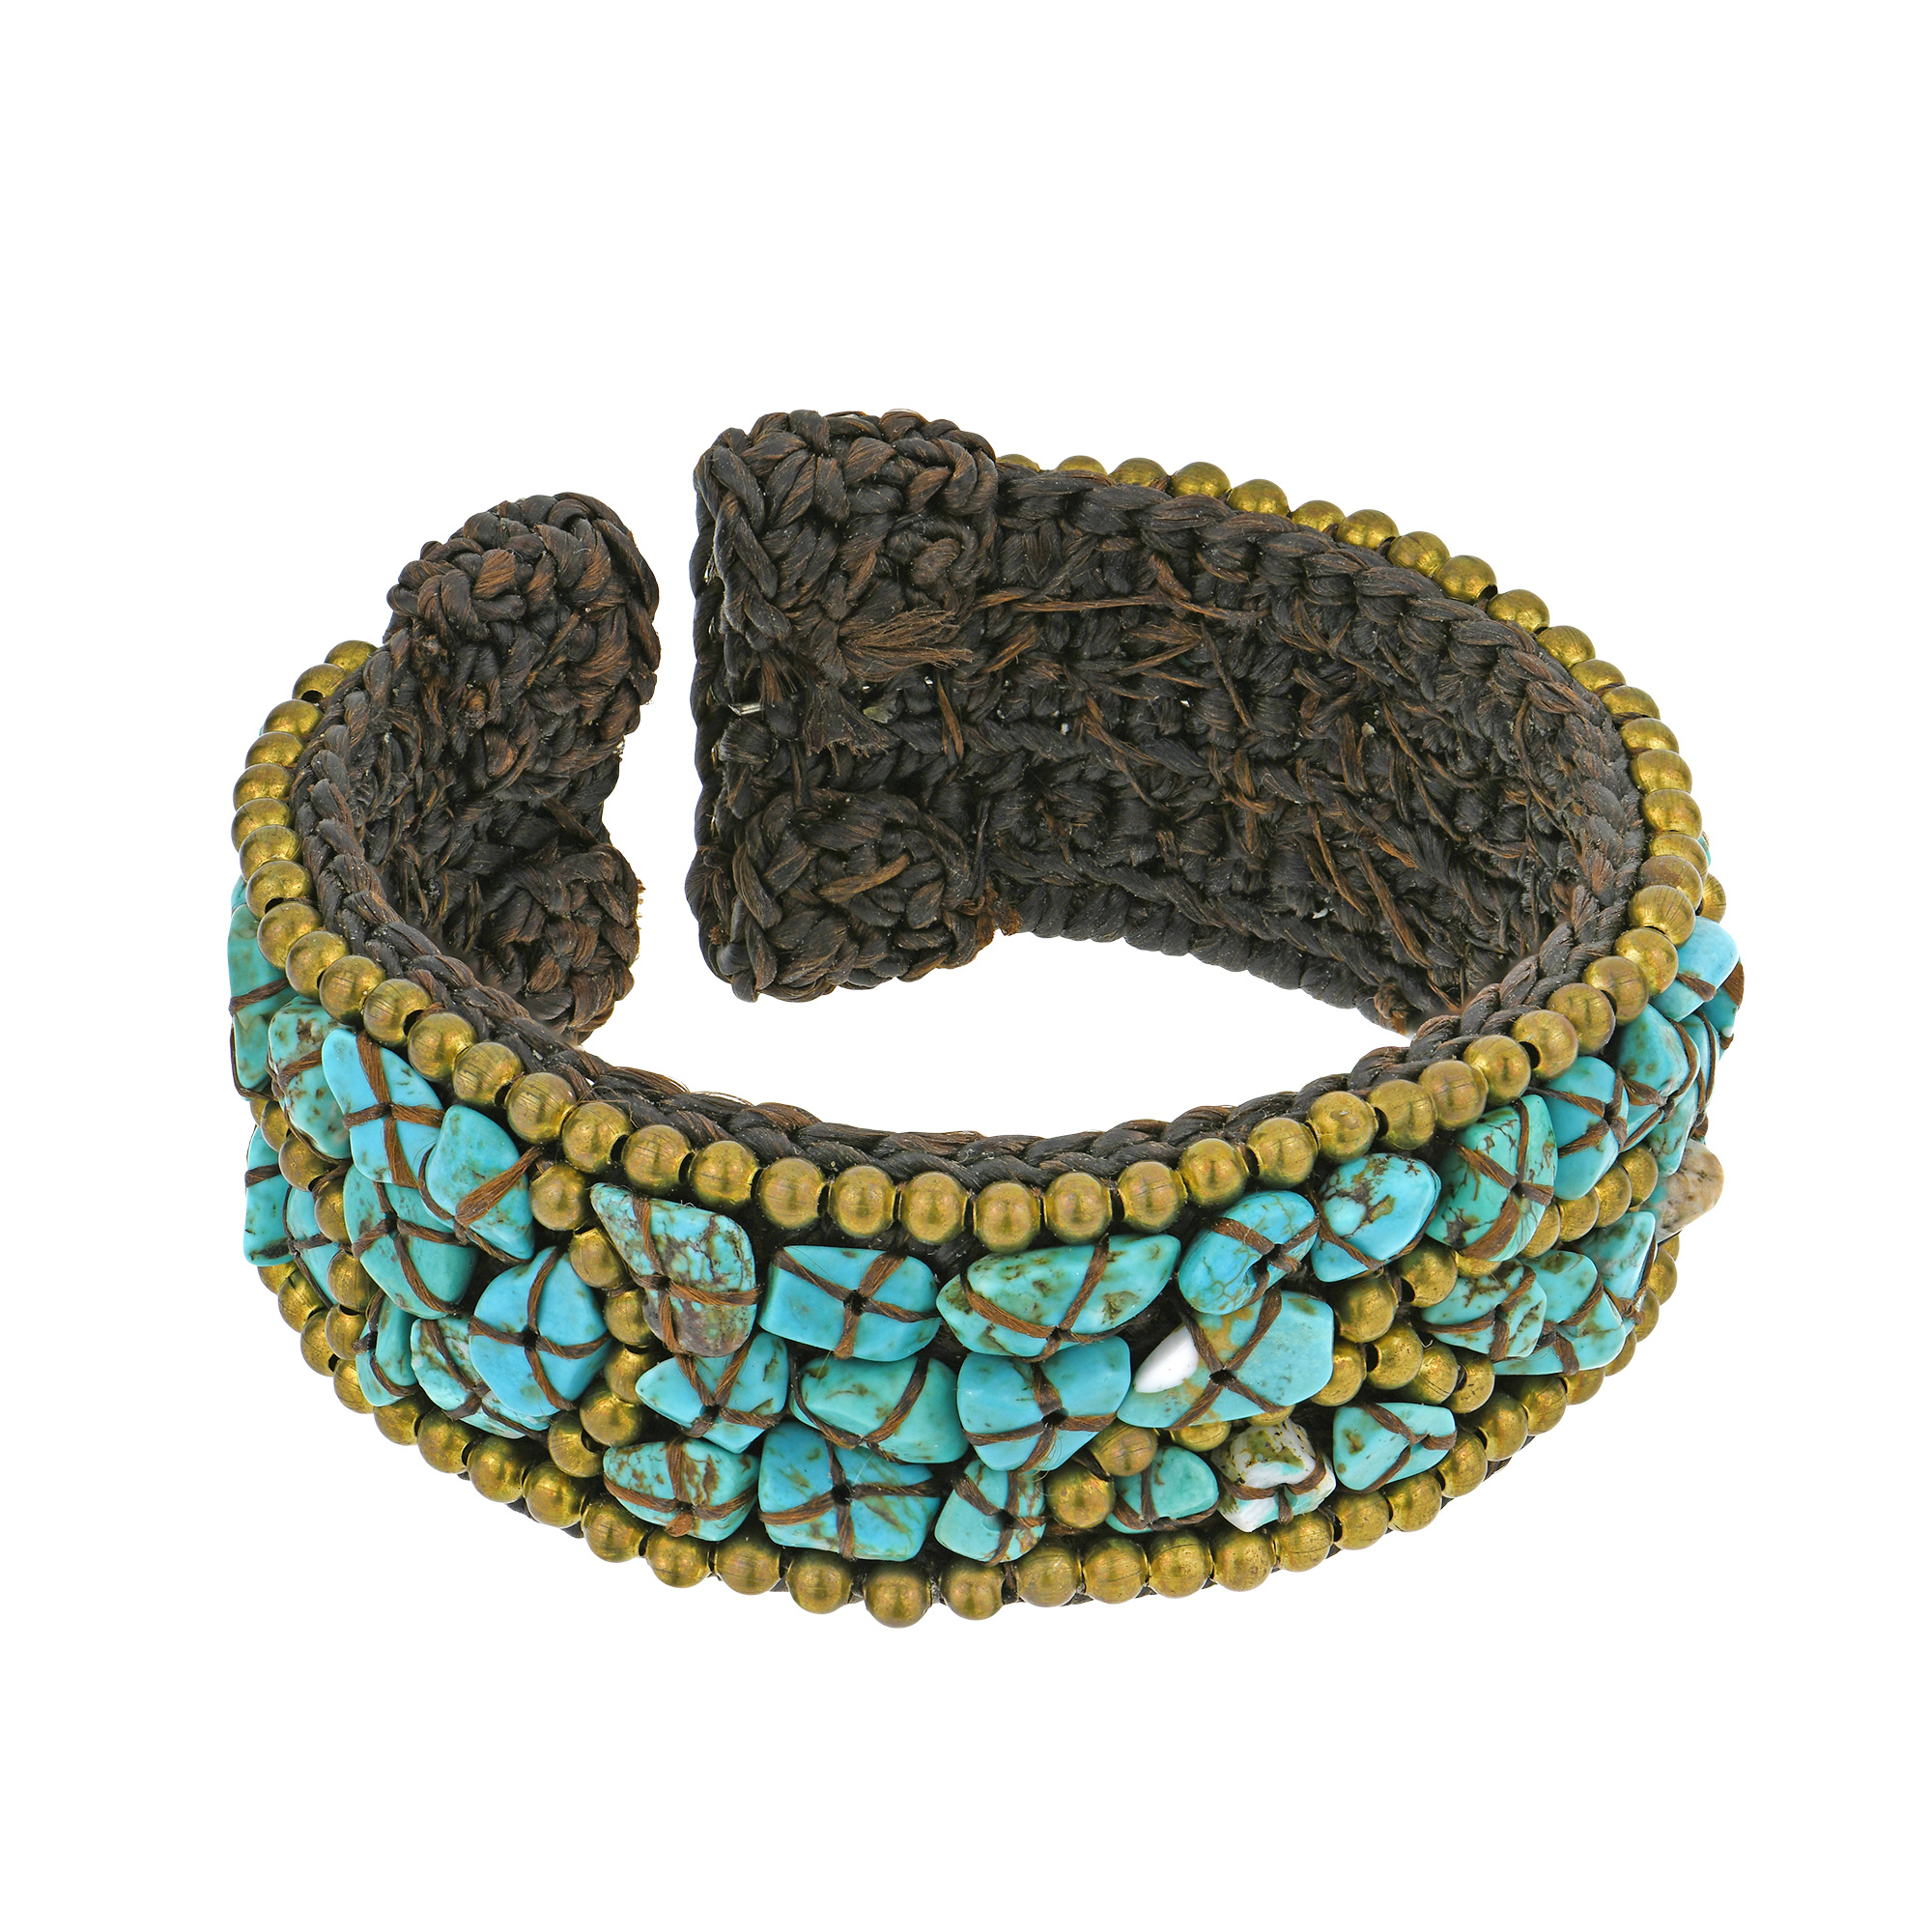 Vibrant Stone and Brass Mosaic on Cotton Rope Cuff Bracelet